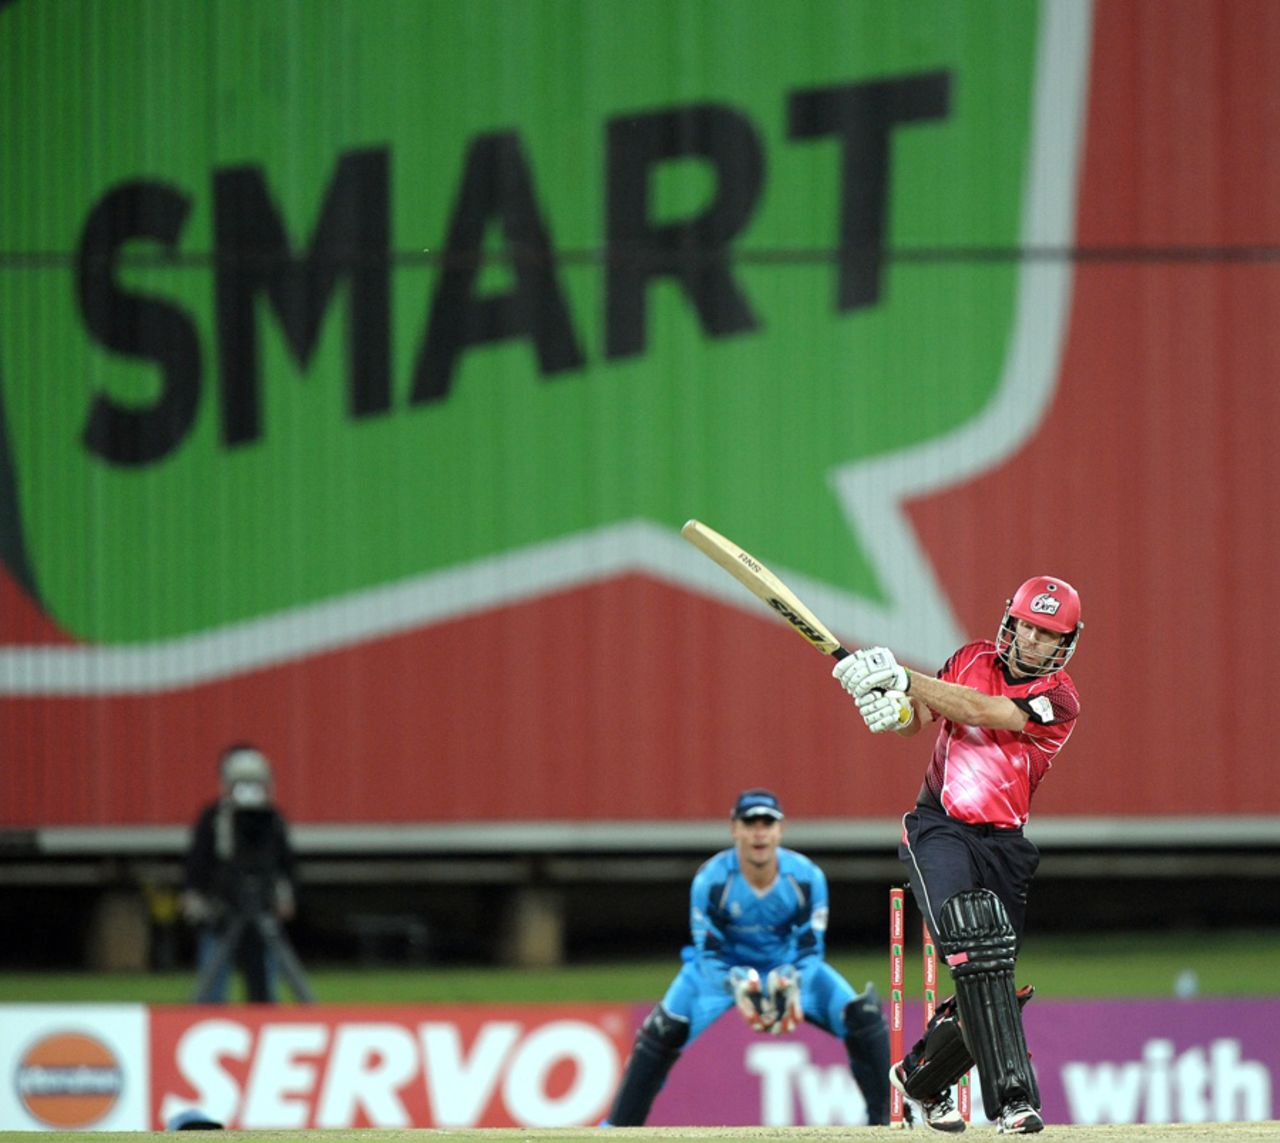 The Sydney Sixers won by two wickets, Titans Sydney Sixers, Champions League T20, semi-final, Centurion, October 26, 2012